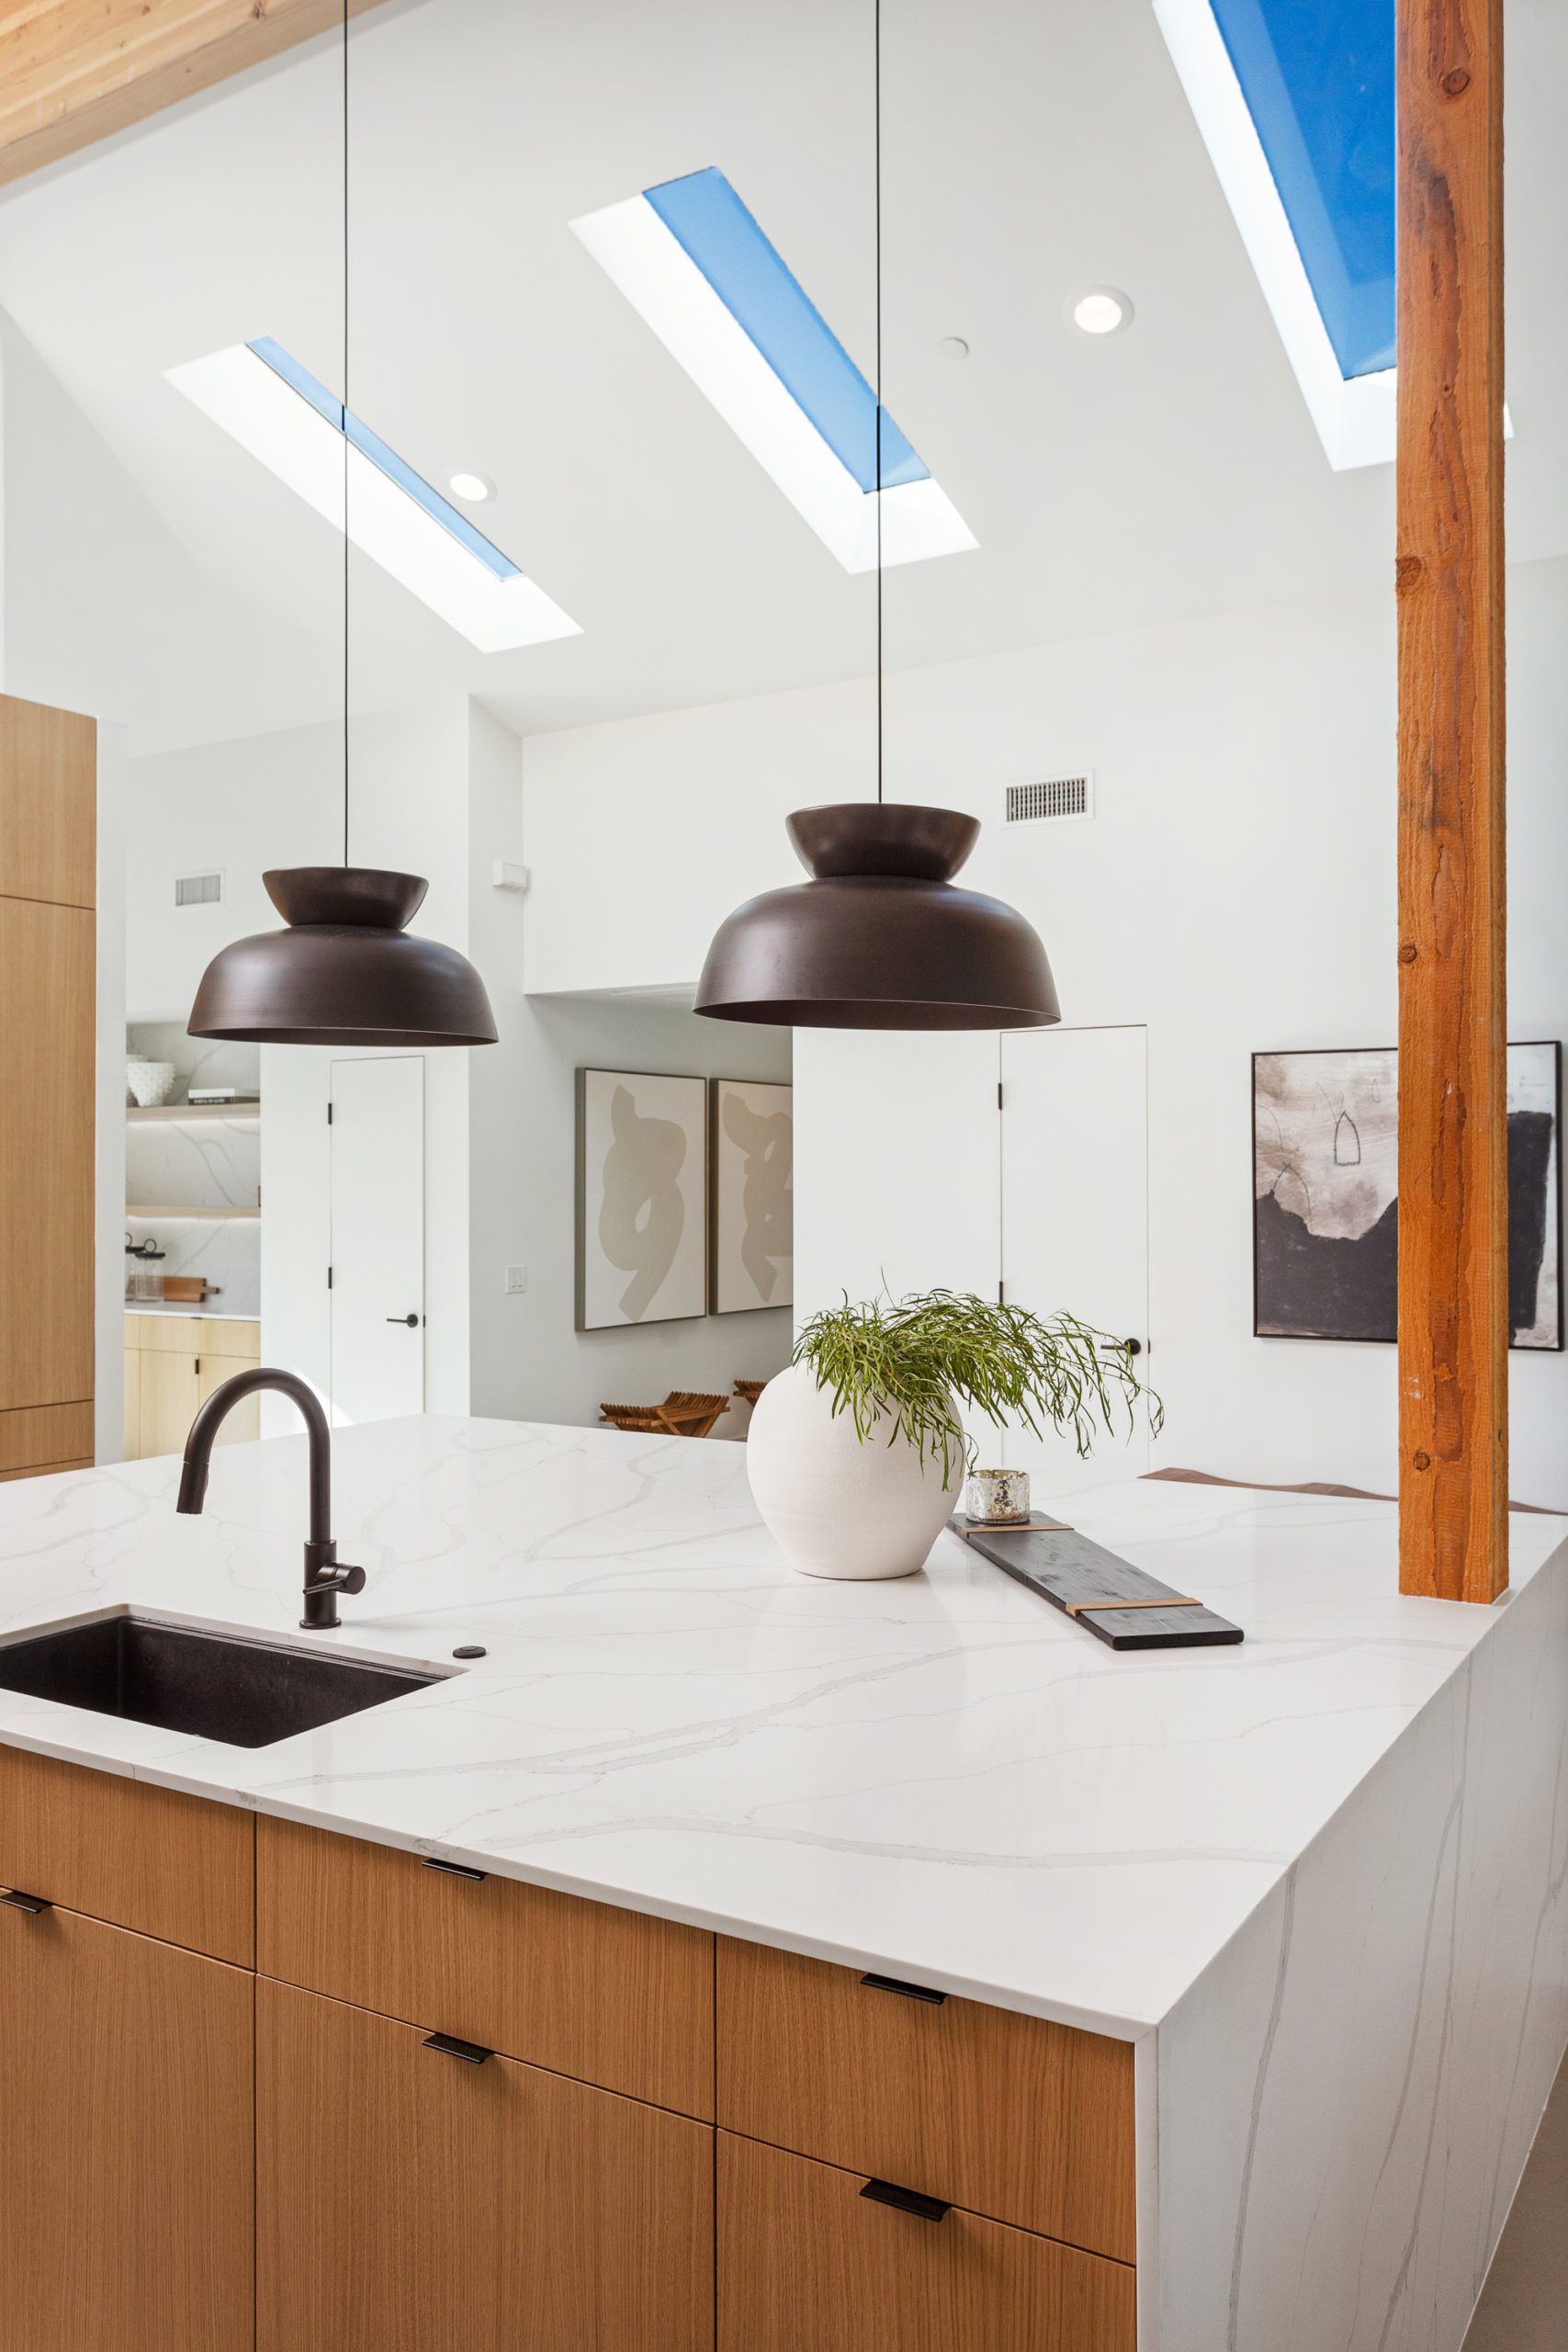 vertical shot of kitchen and skylights